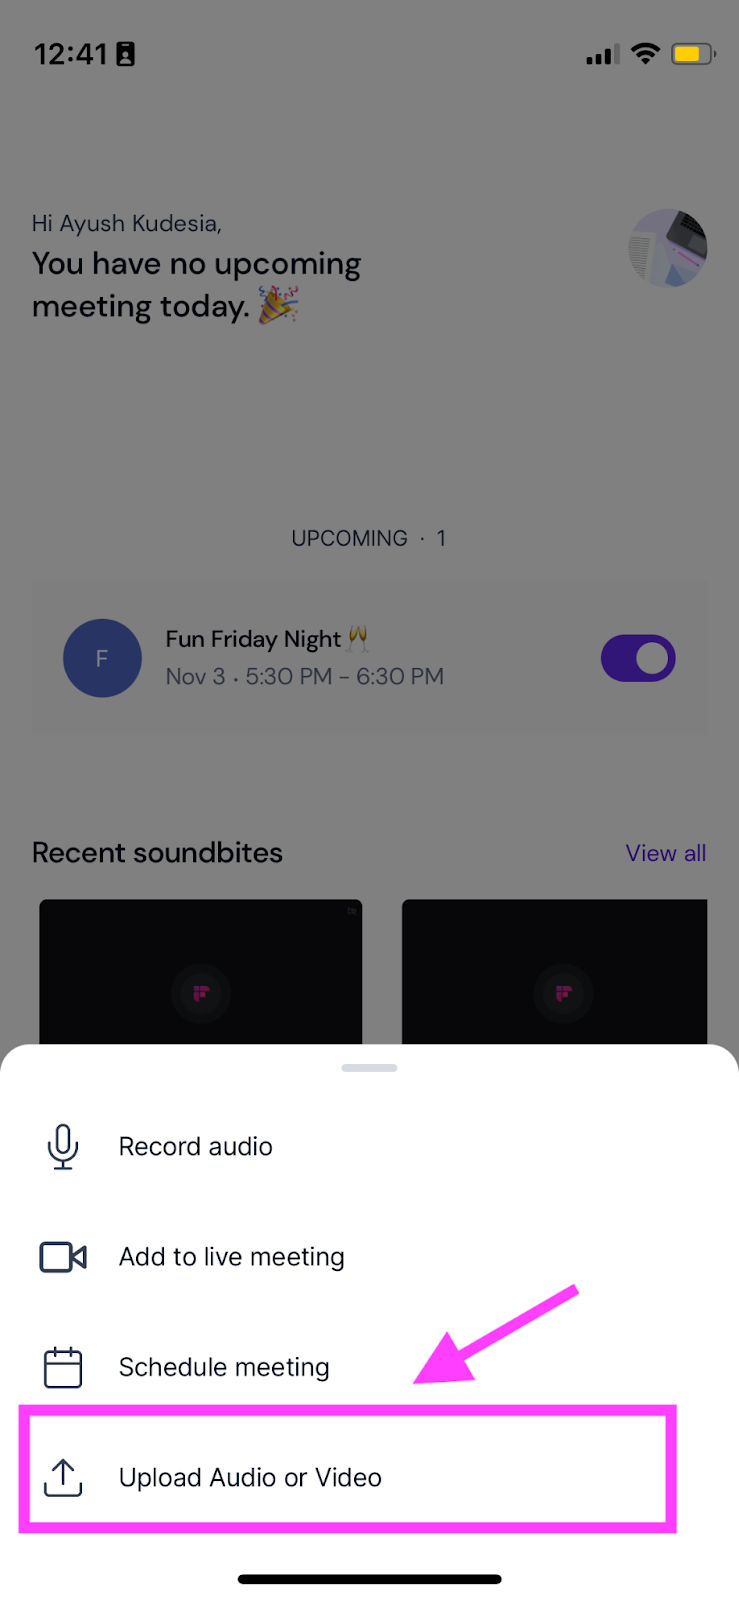 How to record a voice note on iPhone - Upload audio or video in Fireflies mobile app